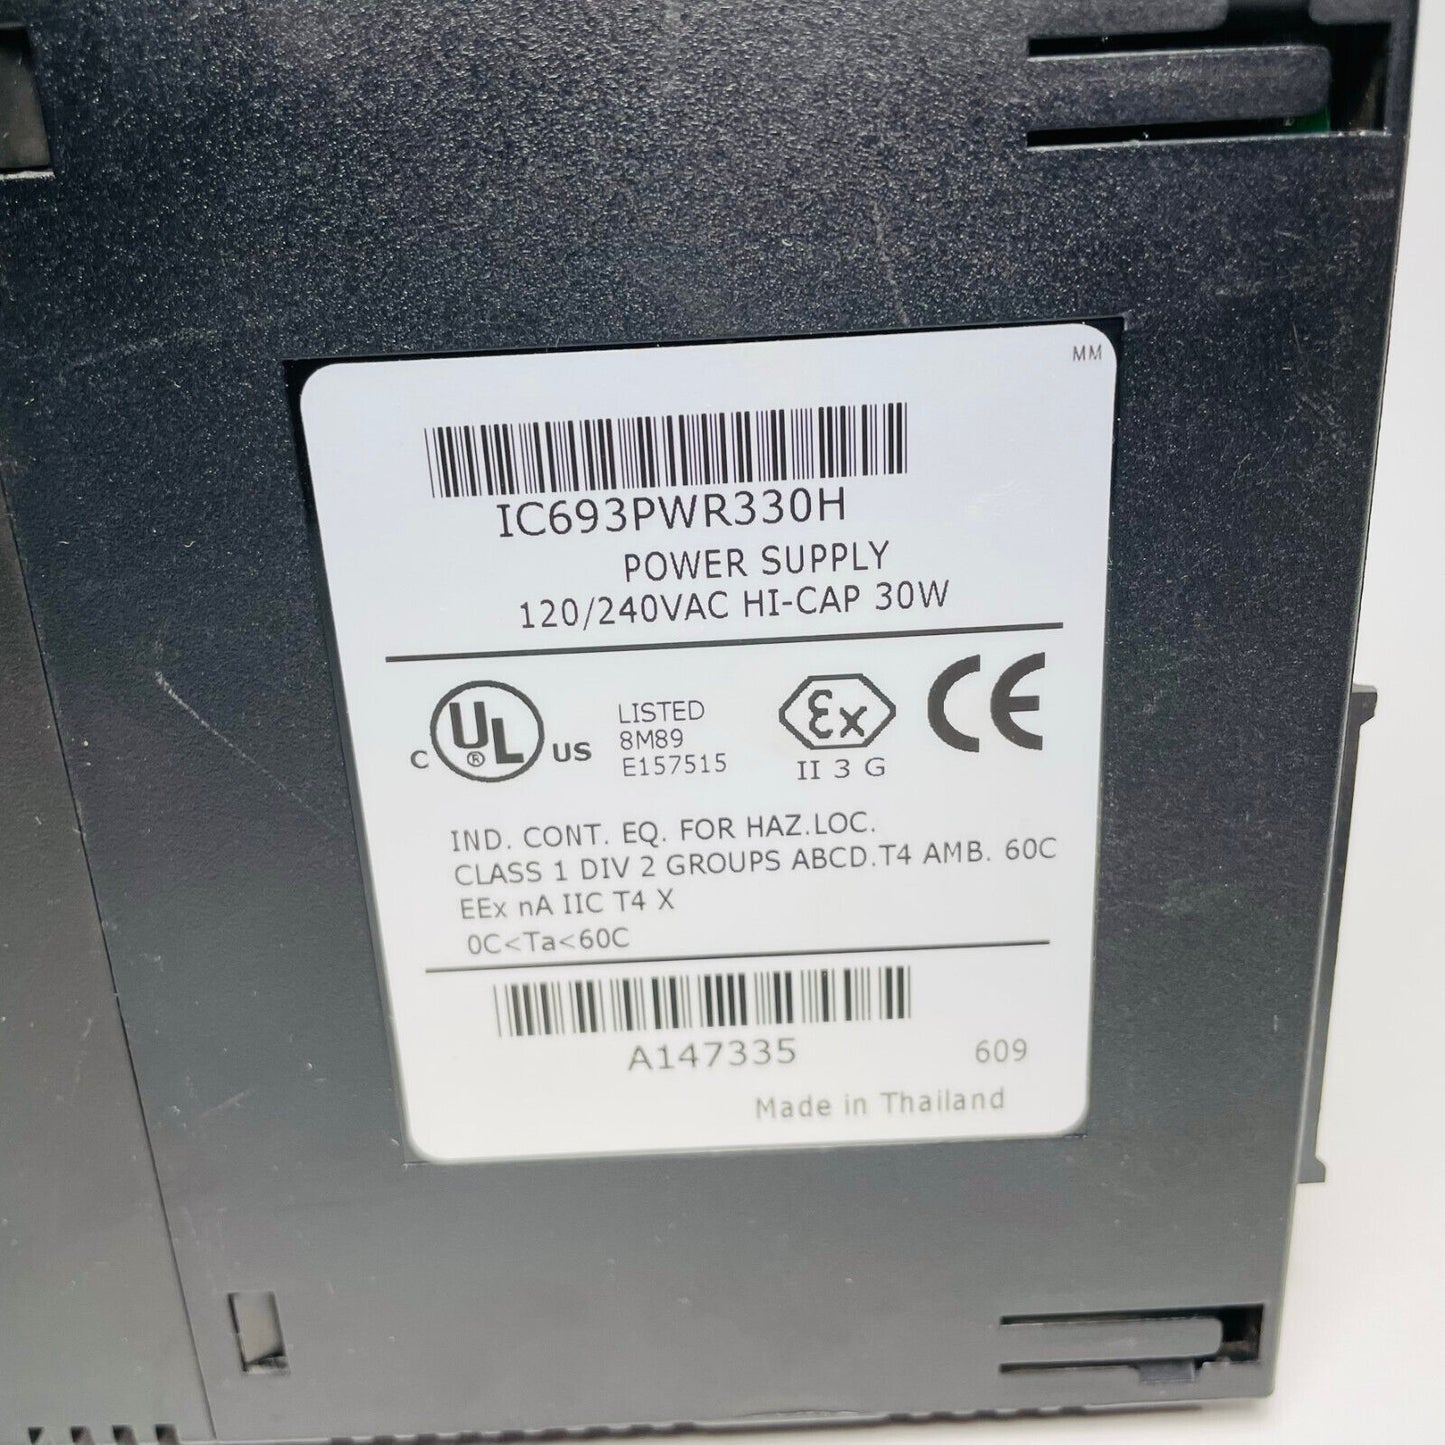 New GE Fanuc IC693PWR330H Power Supply